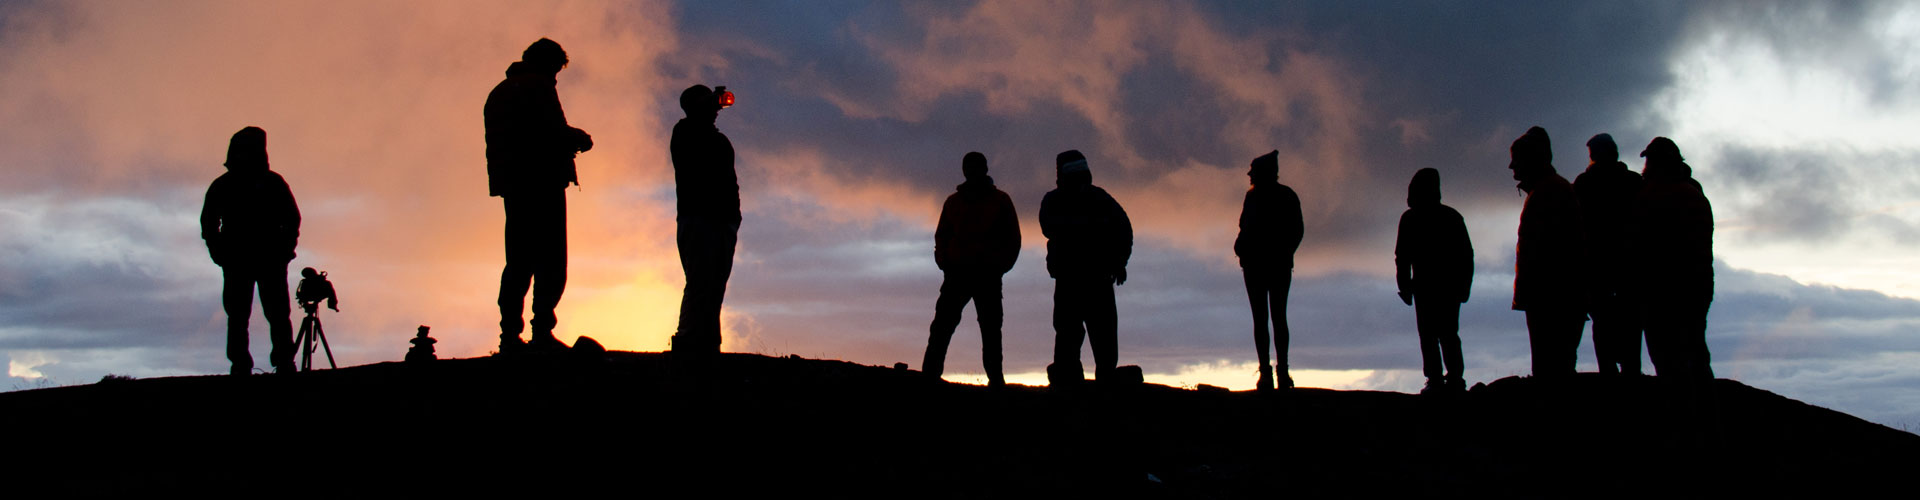 Thomson trekkers silhouetted as the sun rises